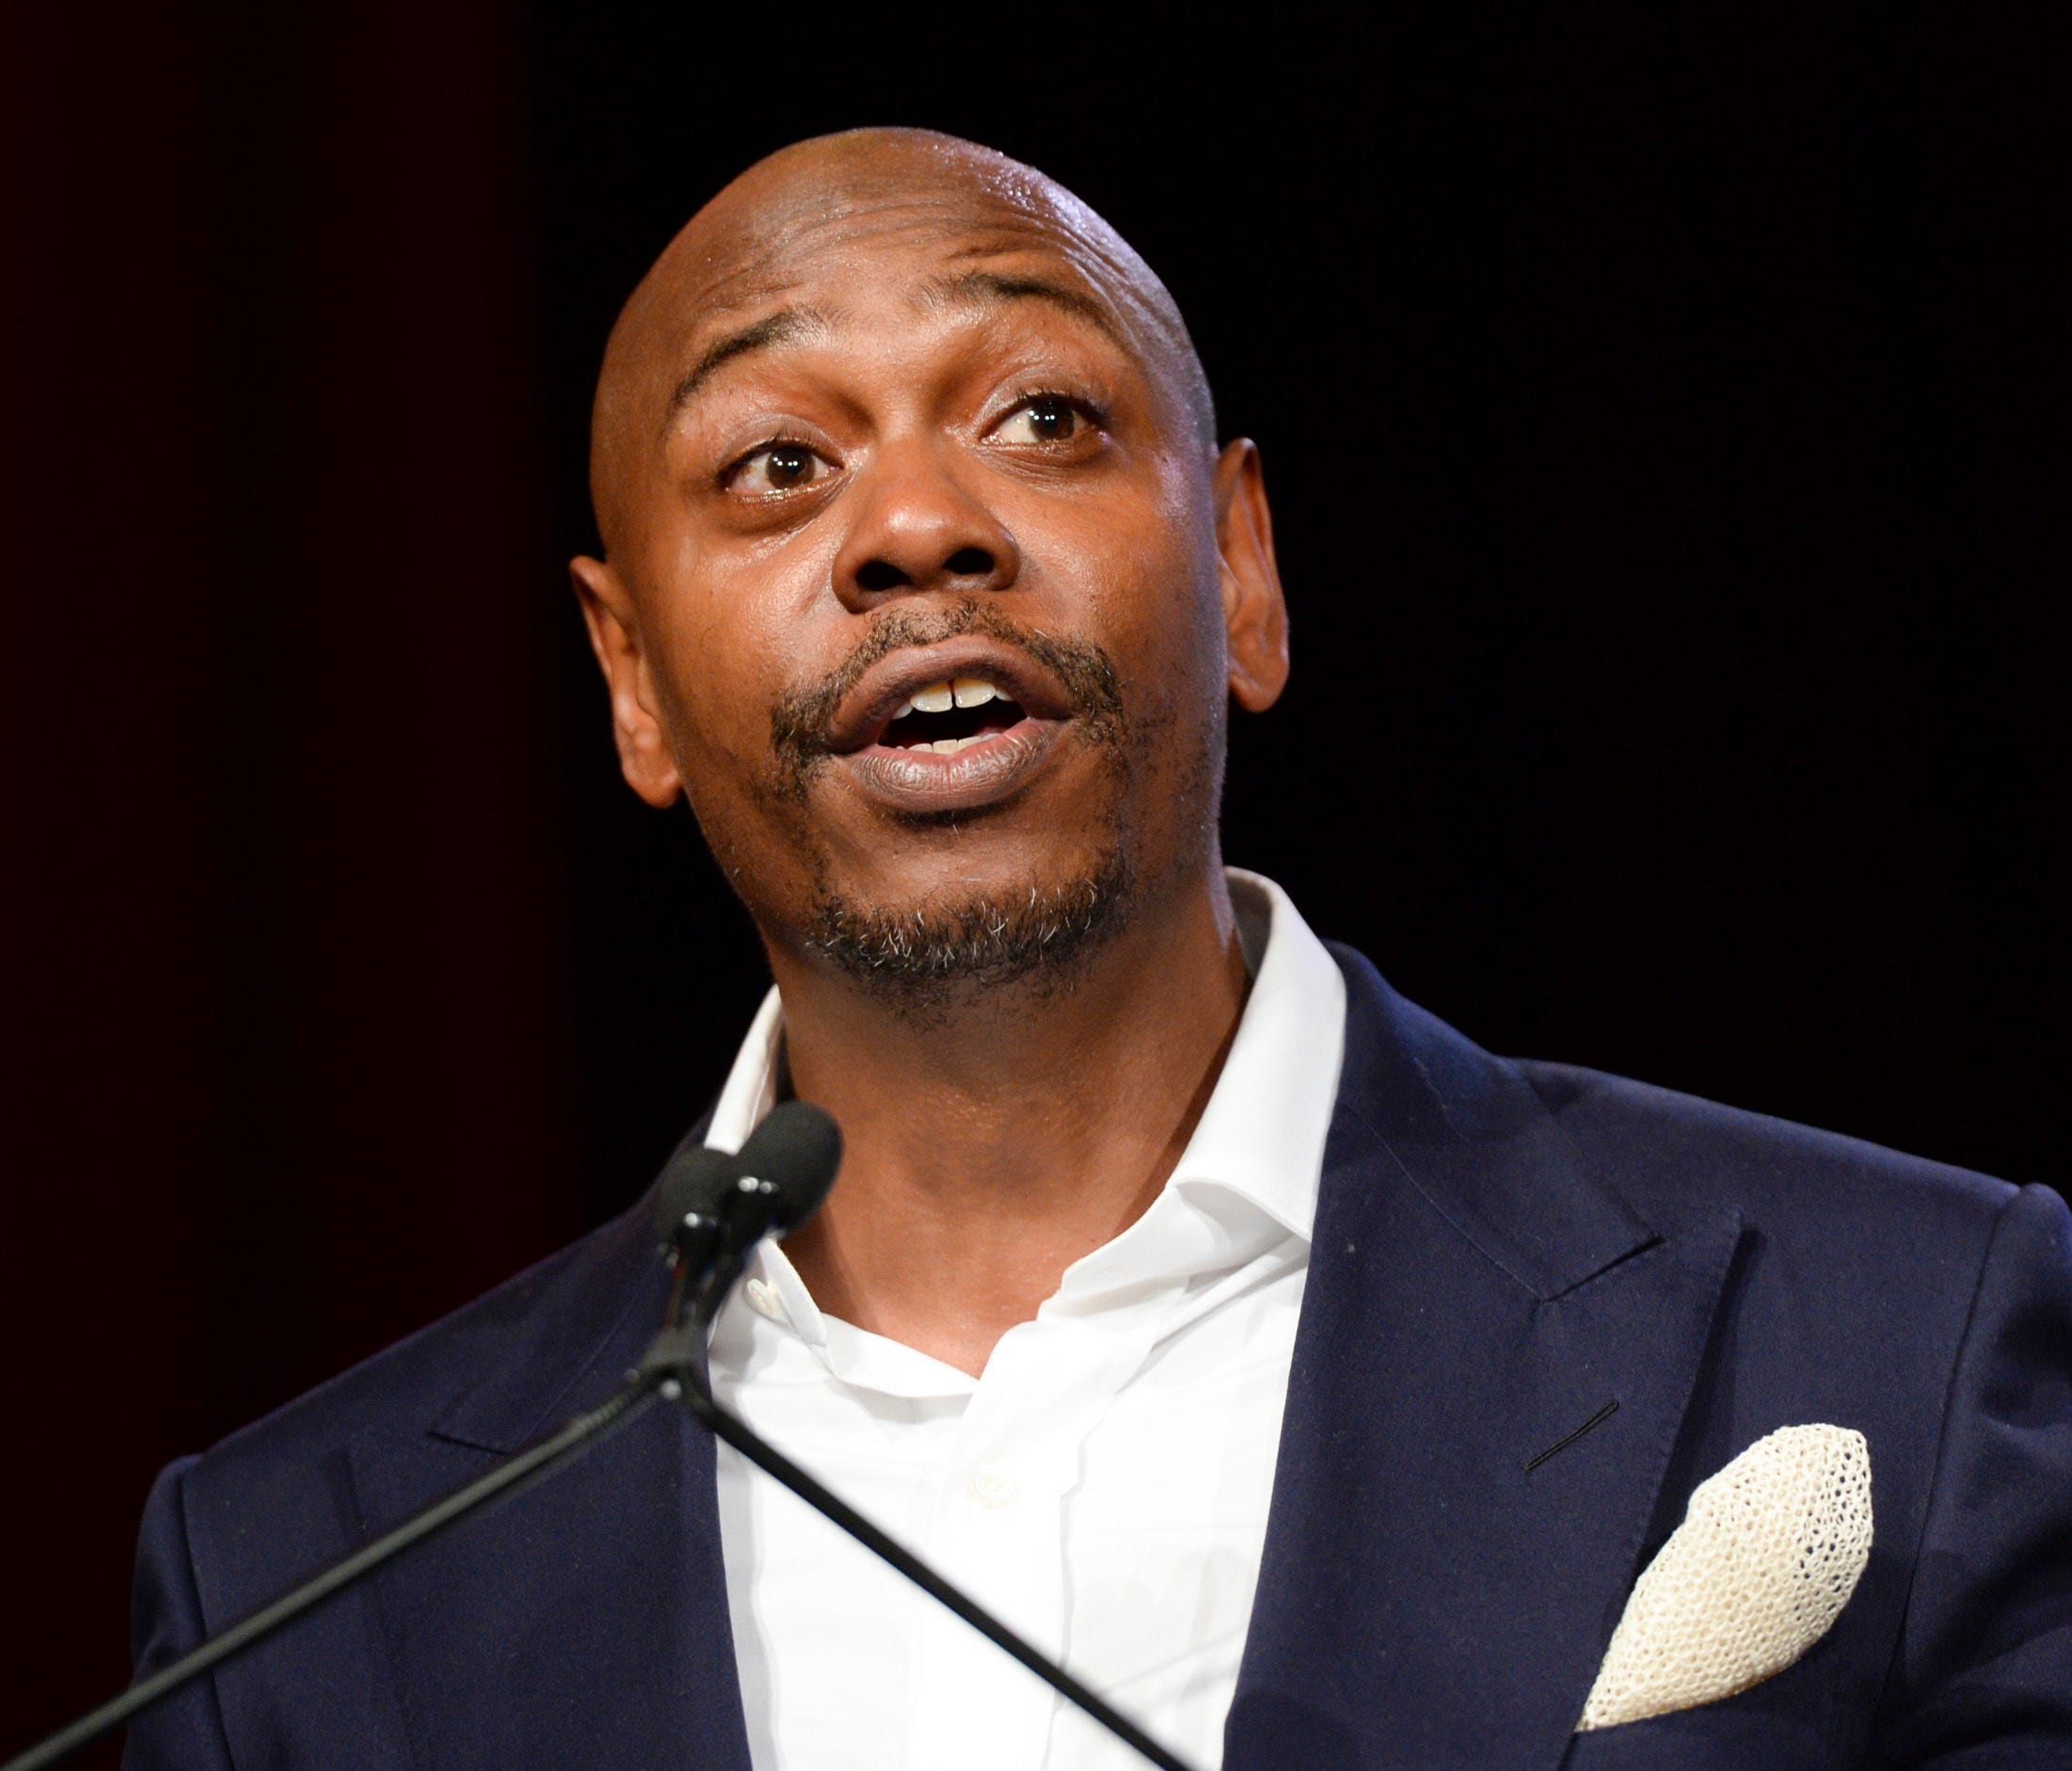 Dave Chappelle's new Netflix special, 'Equanimity,' is out on New Year's Eve.